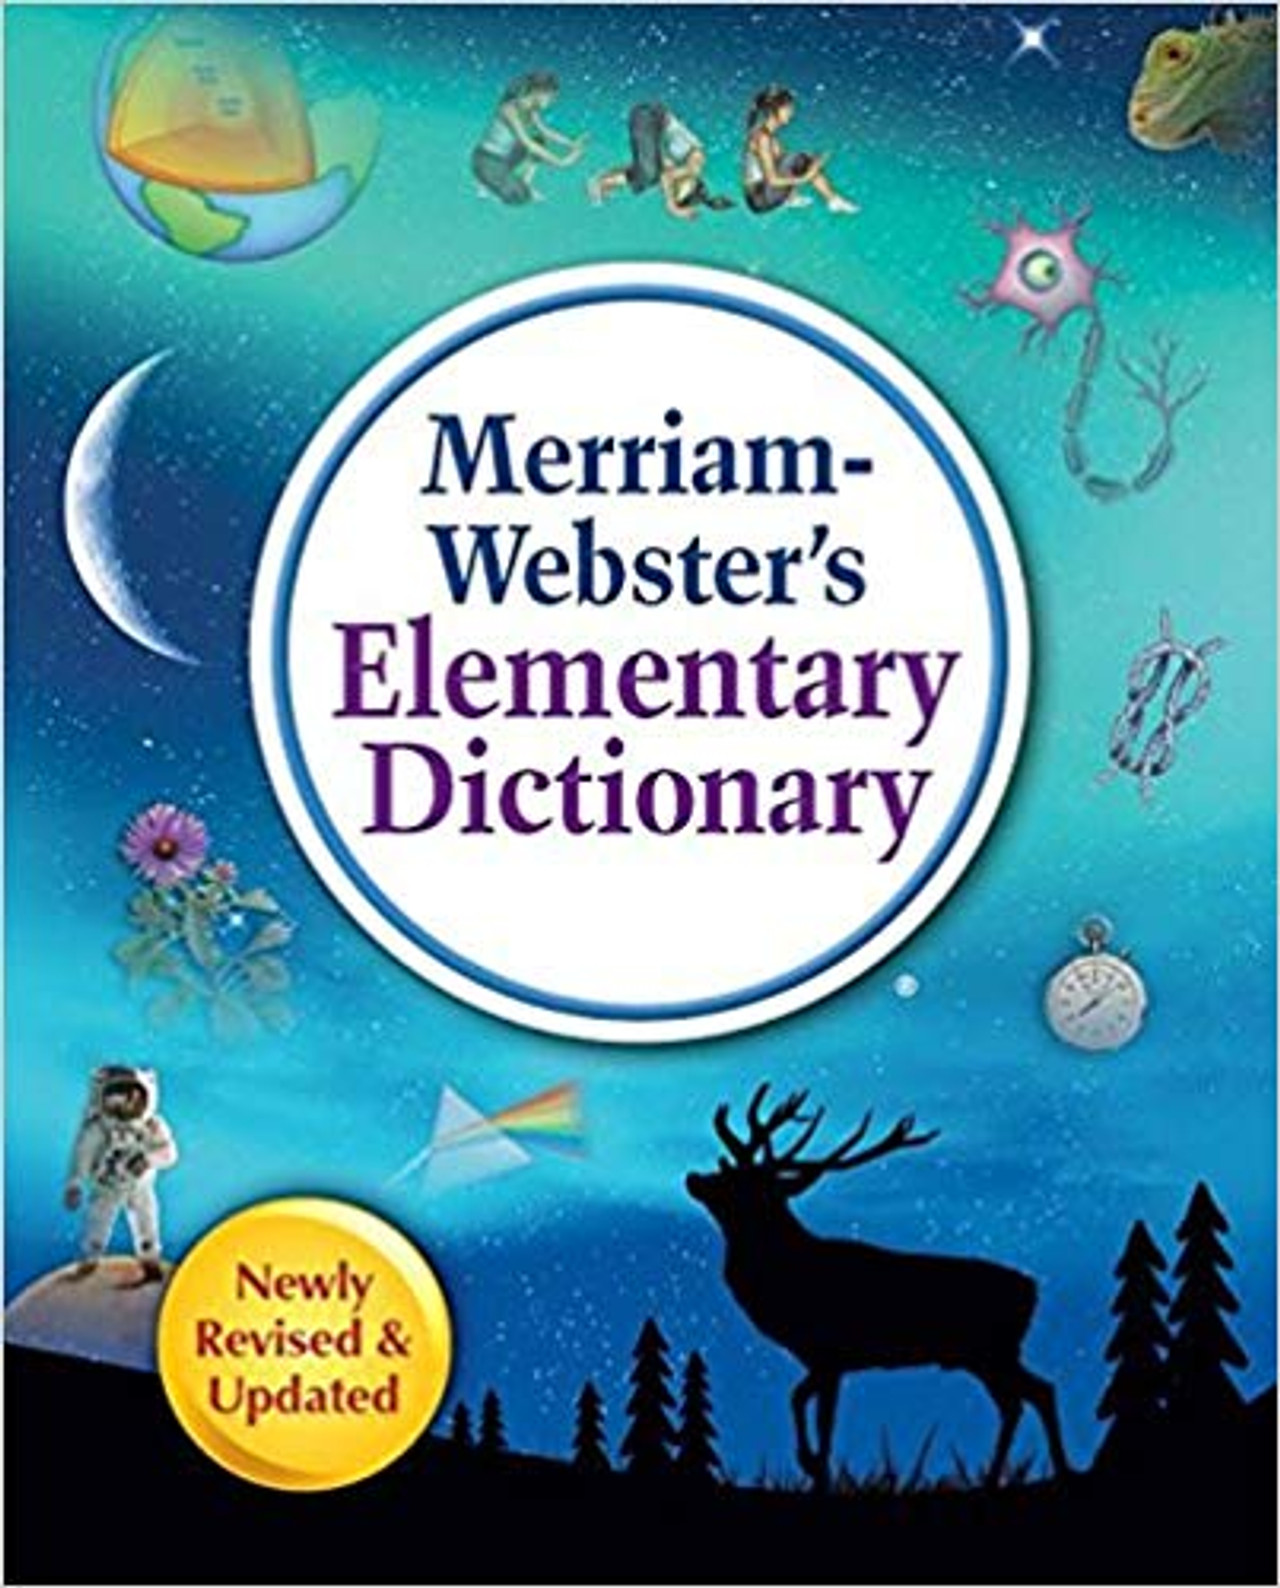 MerriamWebster's Elementary Dictionary (Revised, Updated) BookPal